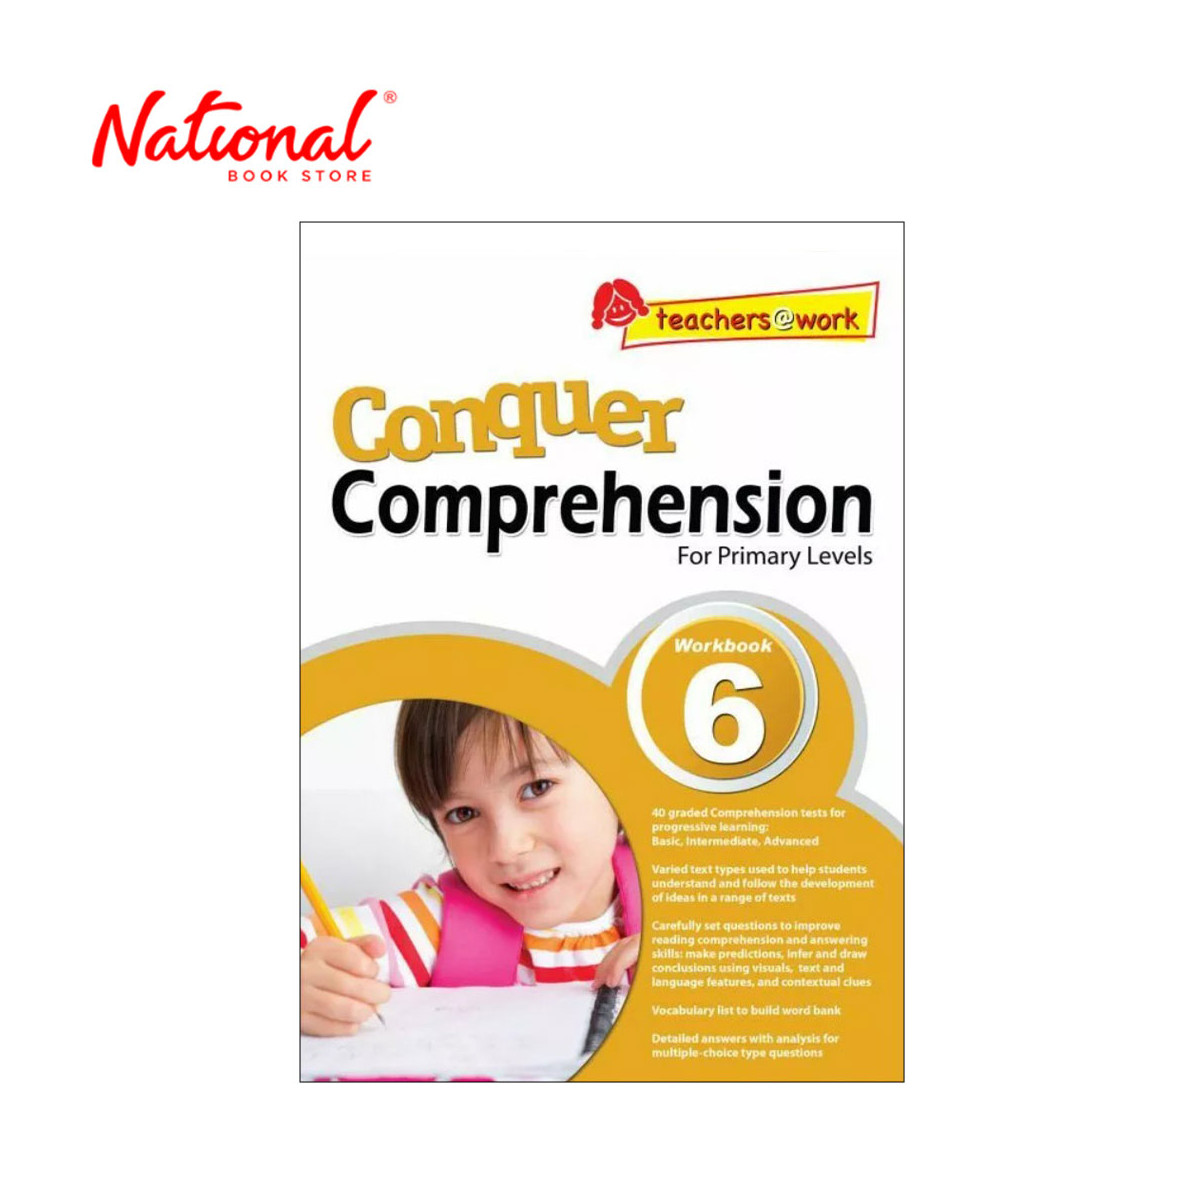 Conquer Comprehension for Primary Levels Workbook 6 by Angela Leu - Trade Paperback - Elementary